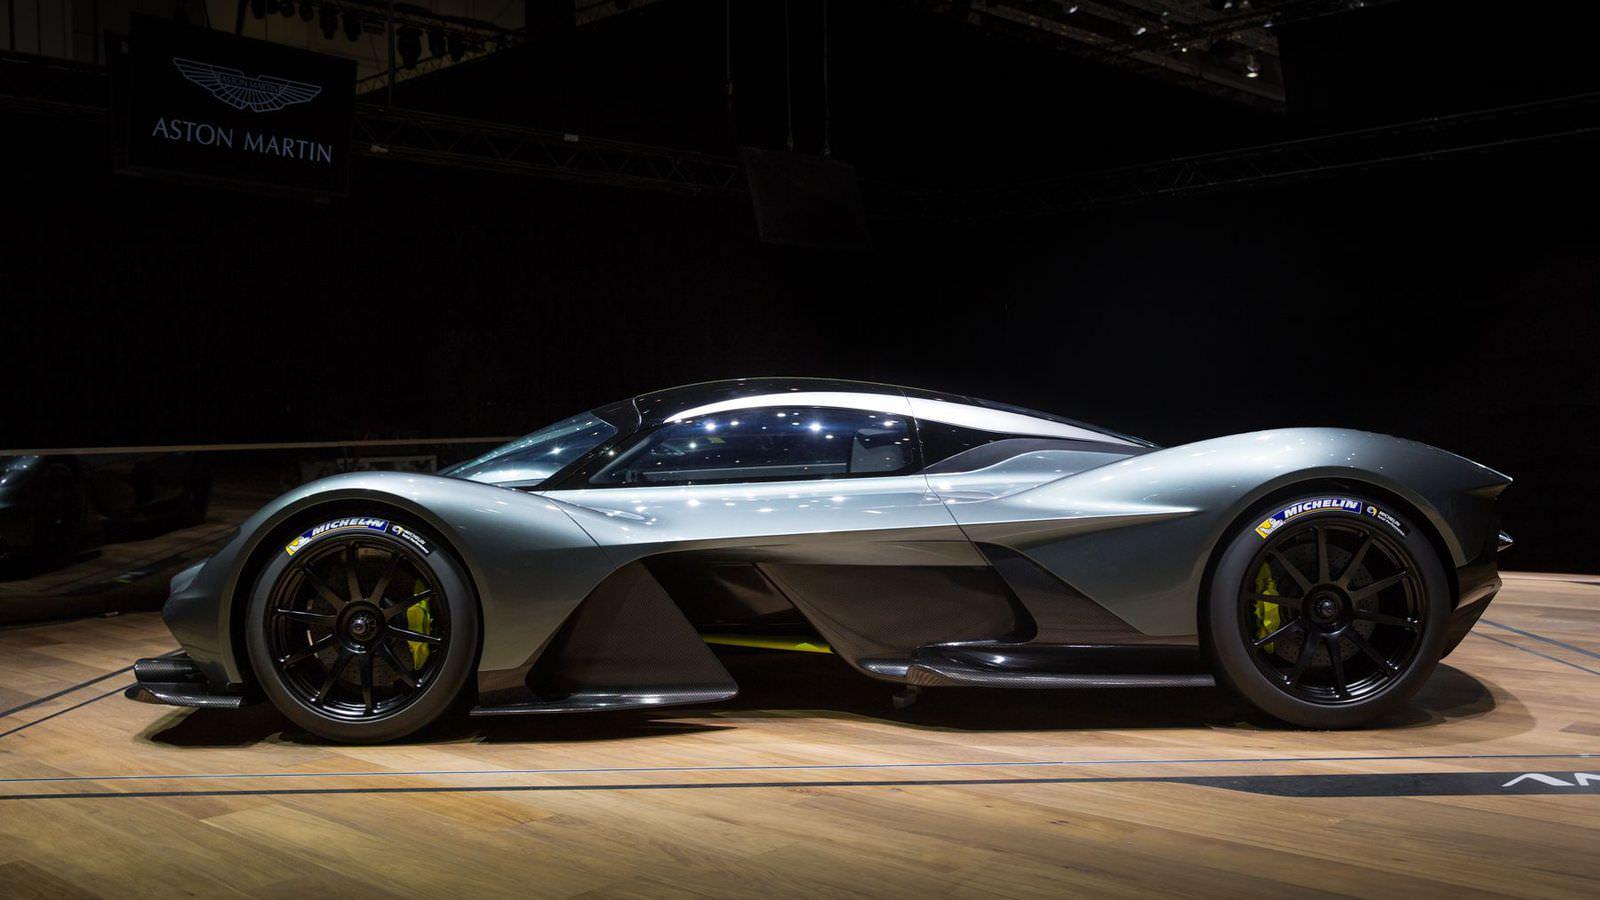 Aston Martin Valkyrie, The Outstanding Significance As A Vehicle